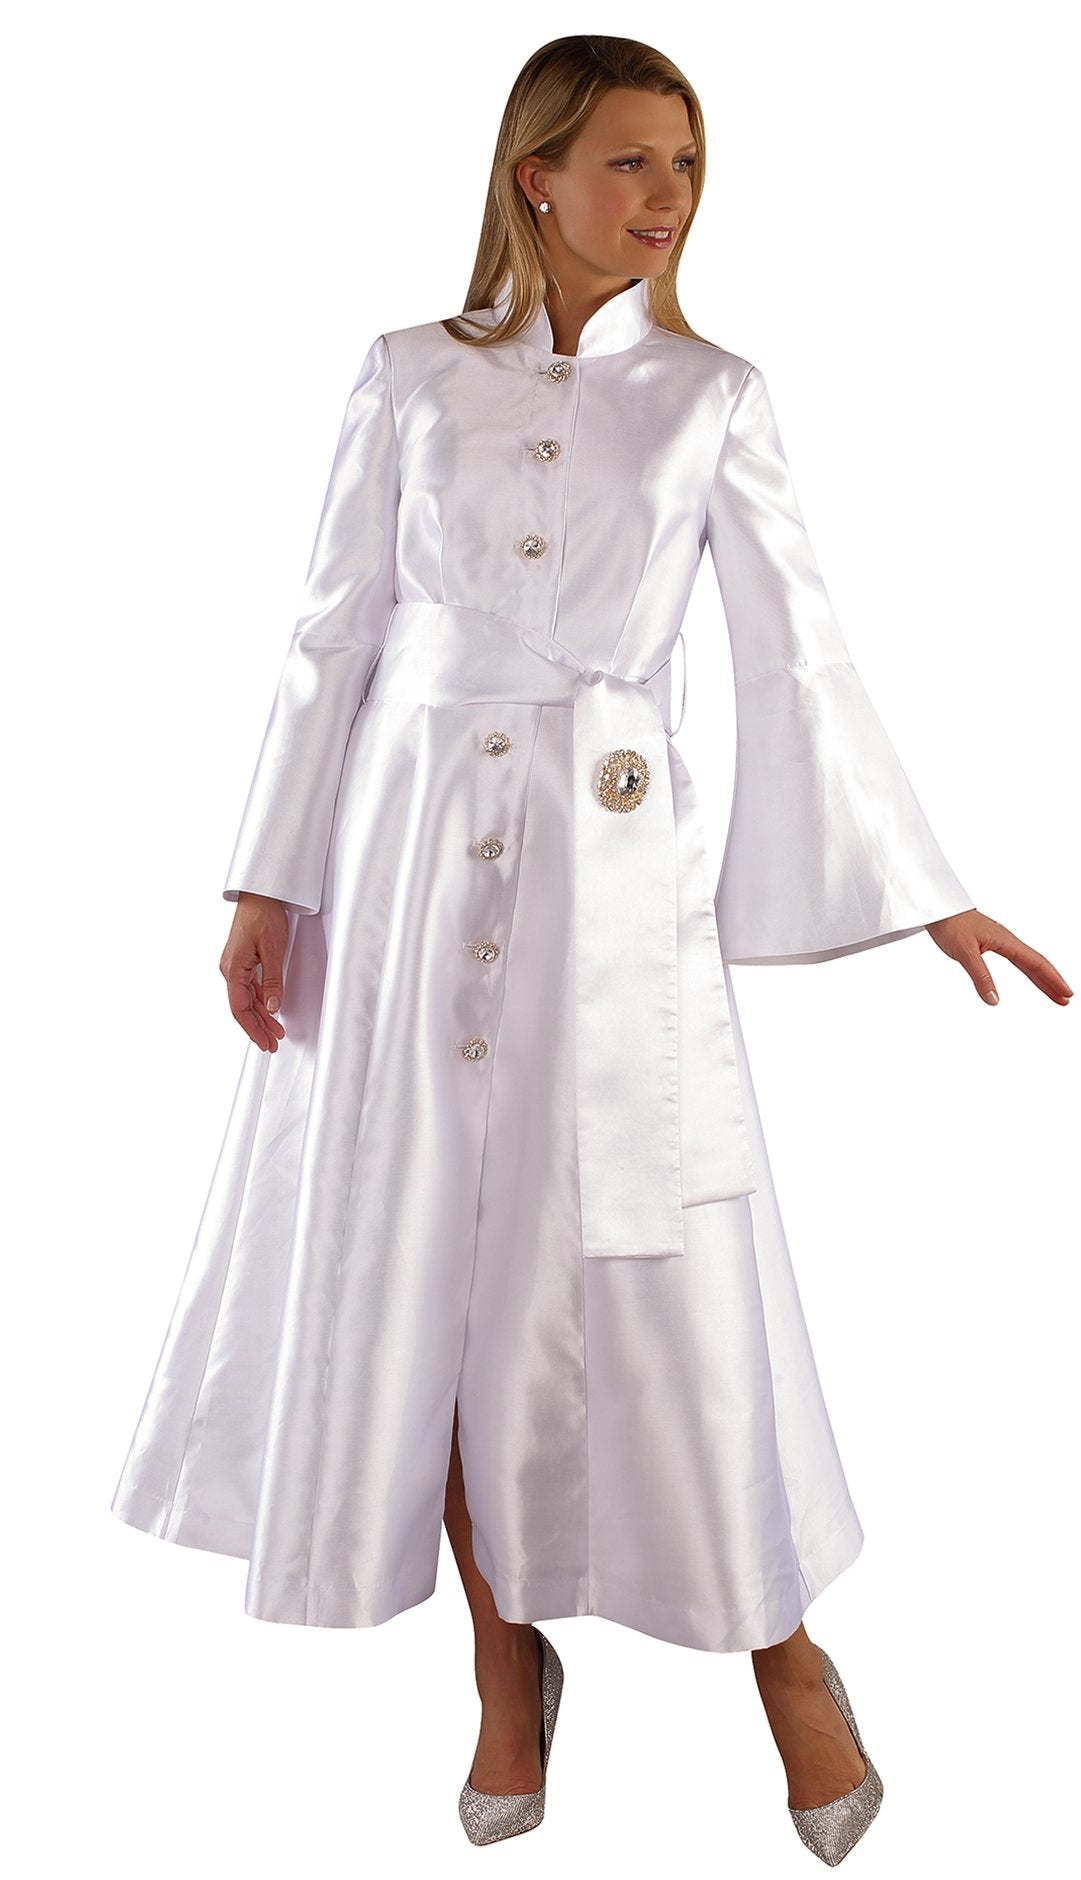 Tally Taylor Church Robe 4732C-White - Church Suits For Less